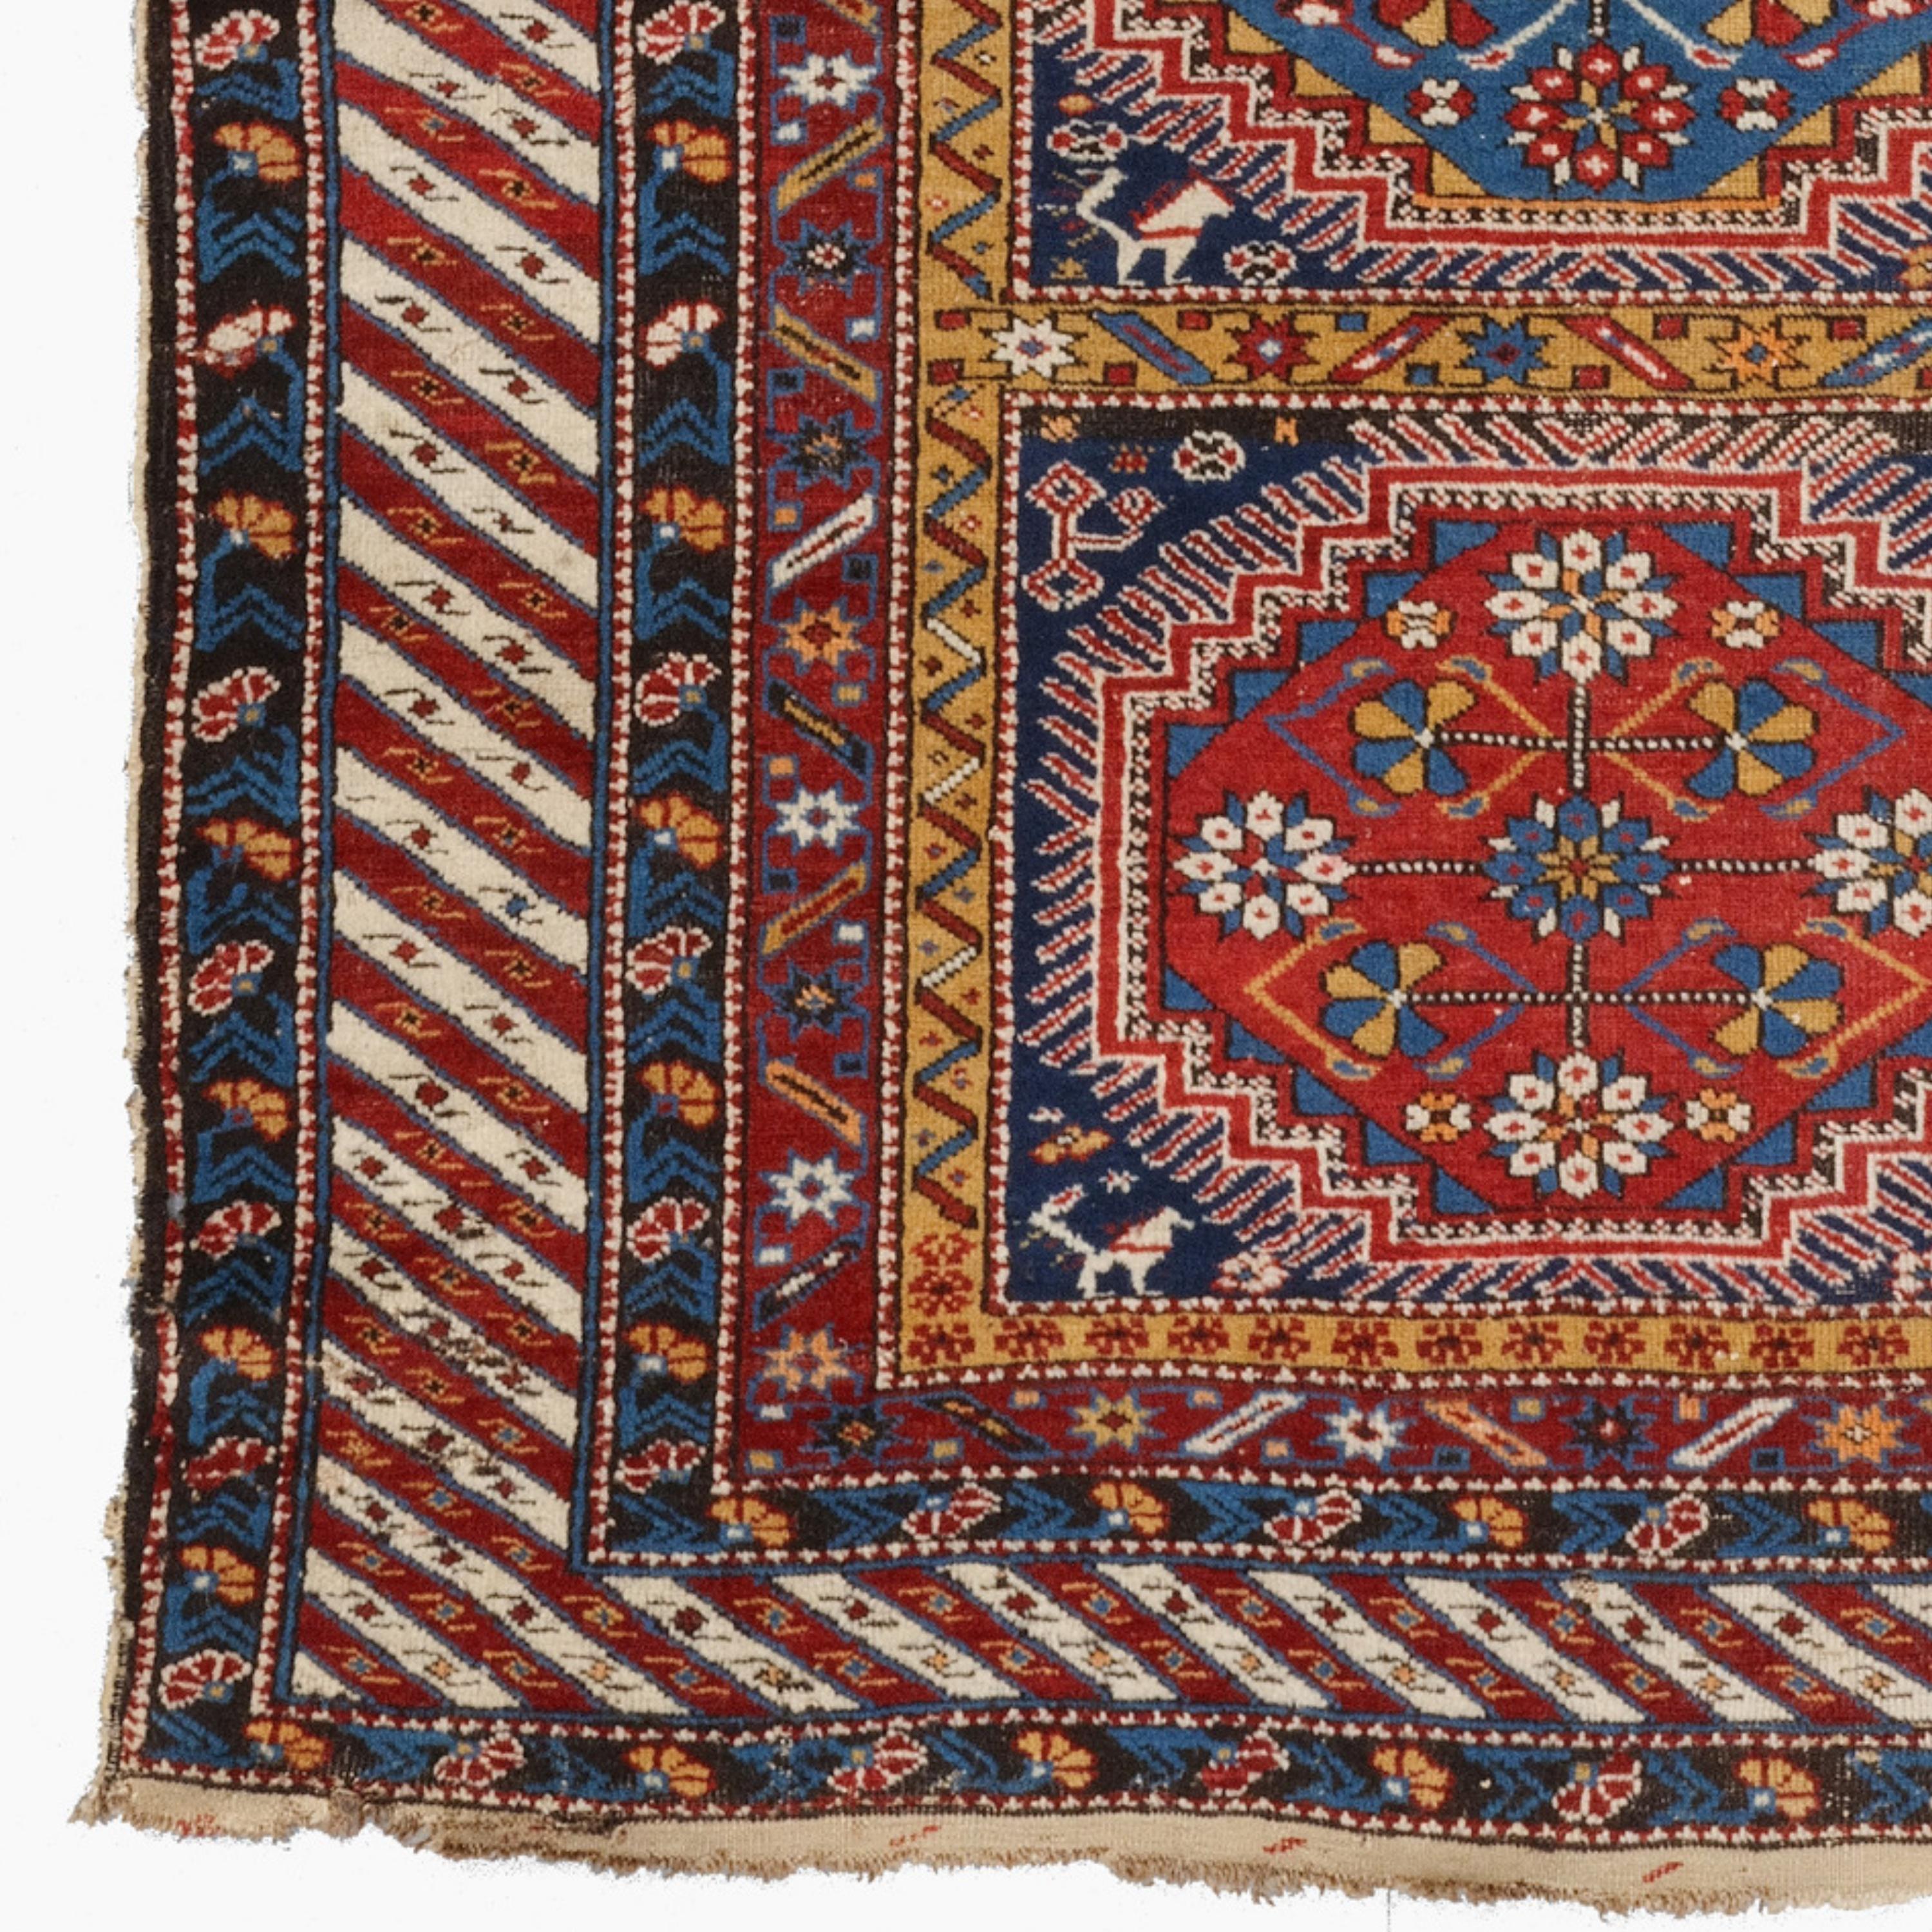 Antique Shirvan Rug
Late Of The 19th Century Caucasian Shirvan Rug in Good Condition
Size: 117 x 172 cm (46x67,7 In)

The Shirvan carpet is a handmade floor covering in the Shirvan region of Azerbaijan in the Southeastern Caucasus.

Many of the